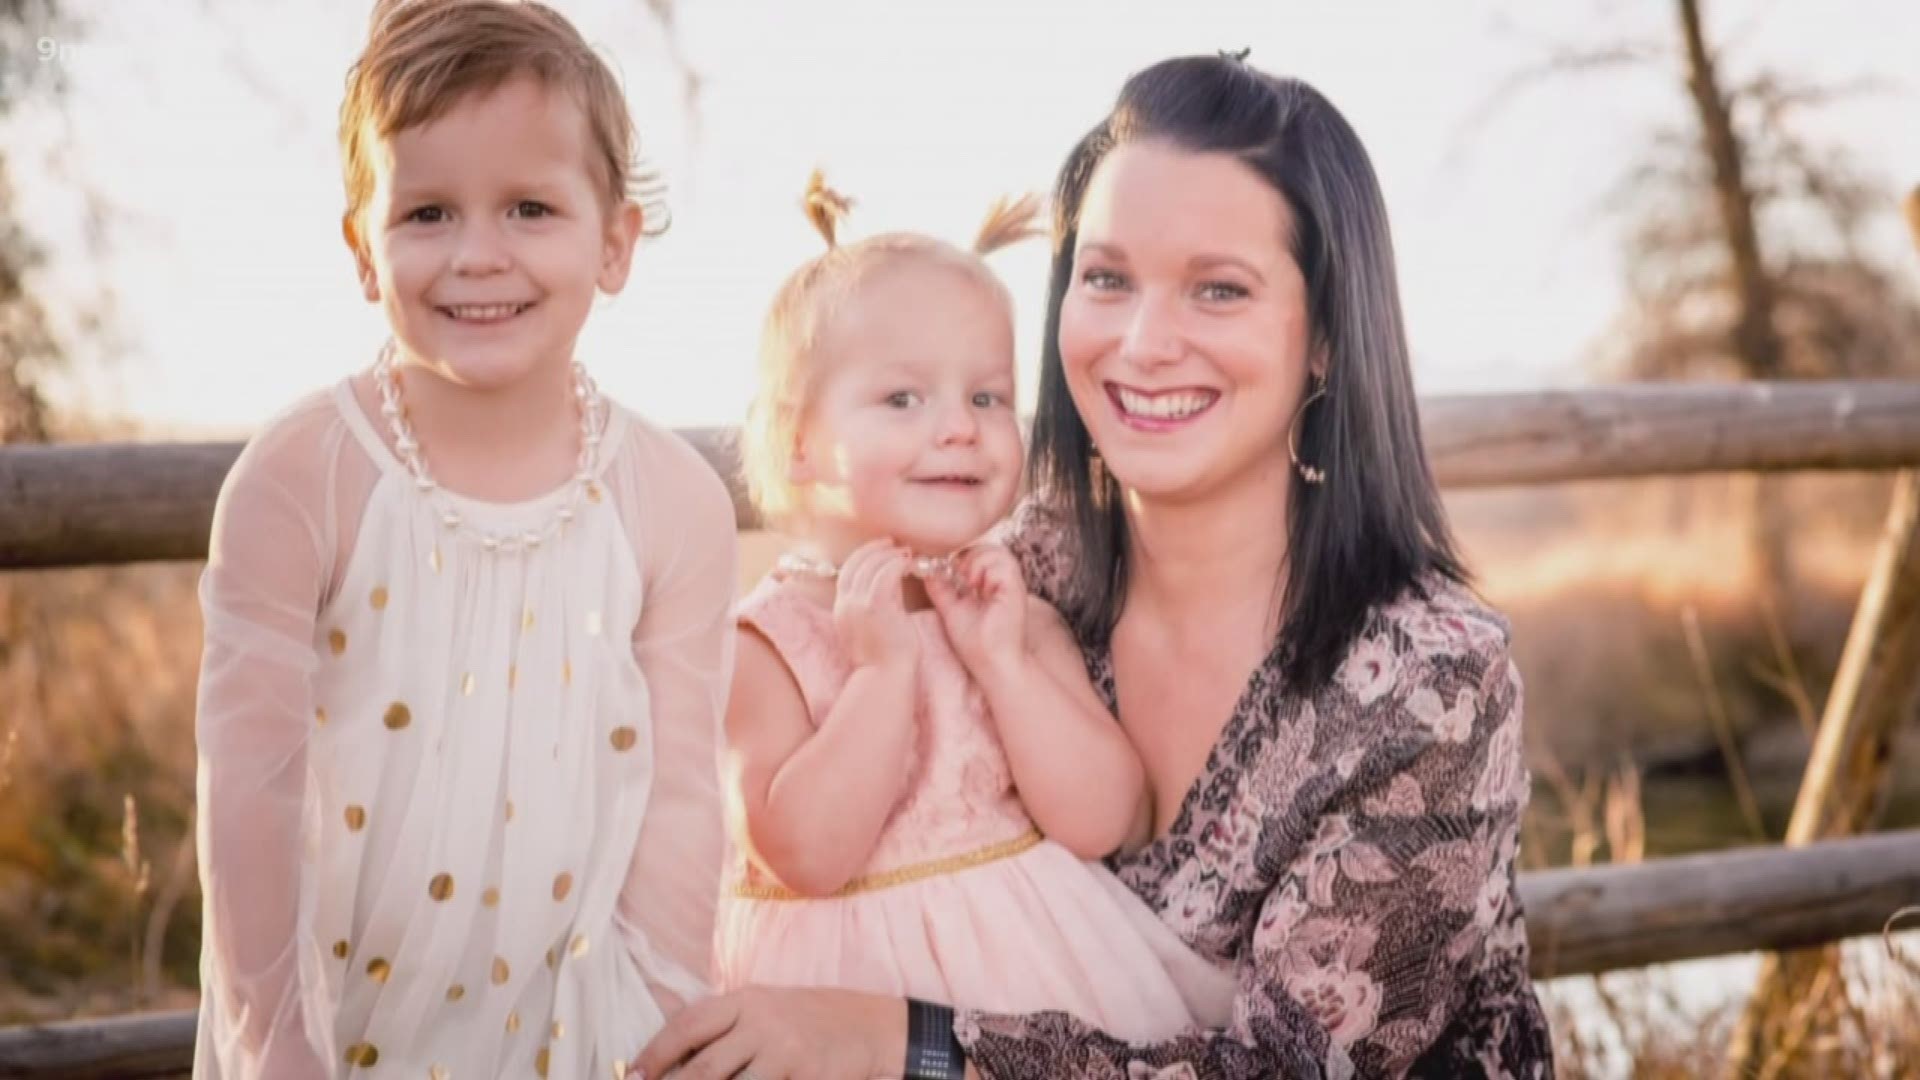 A social studies teacher at Overland High School has been on administrative leave for 5 months, the family of Shanann Watts is still dealing with threats and more.